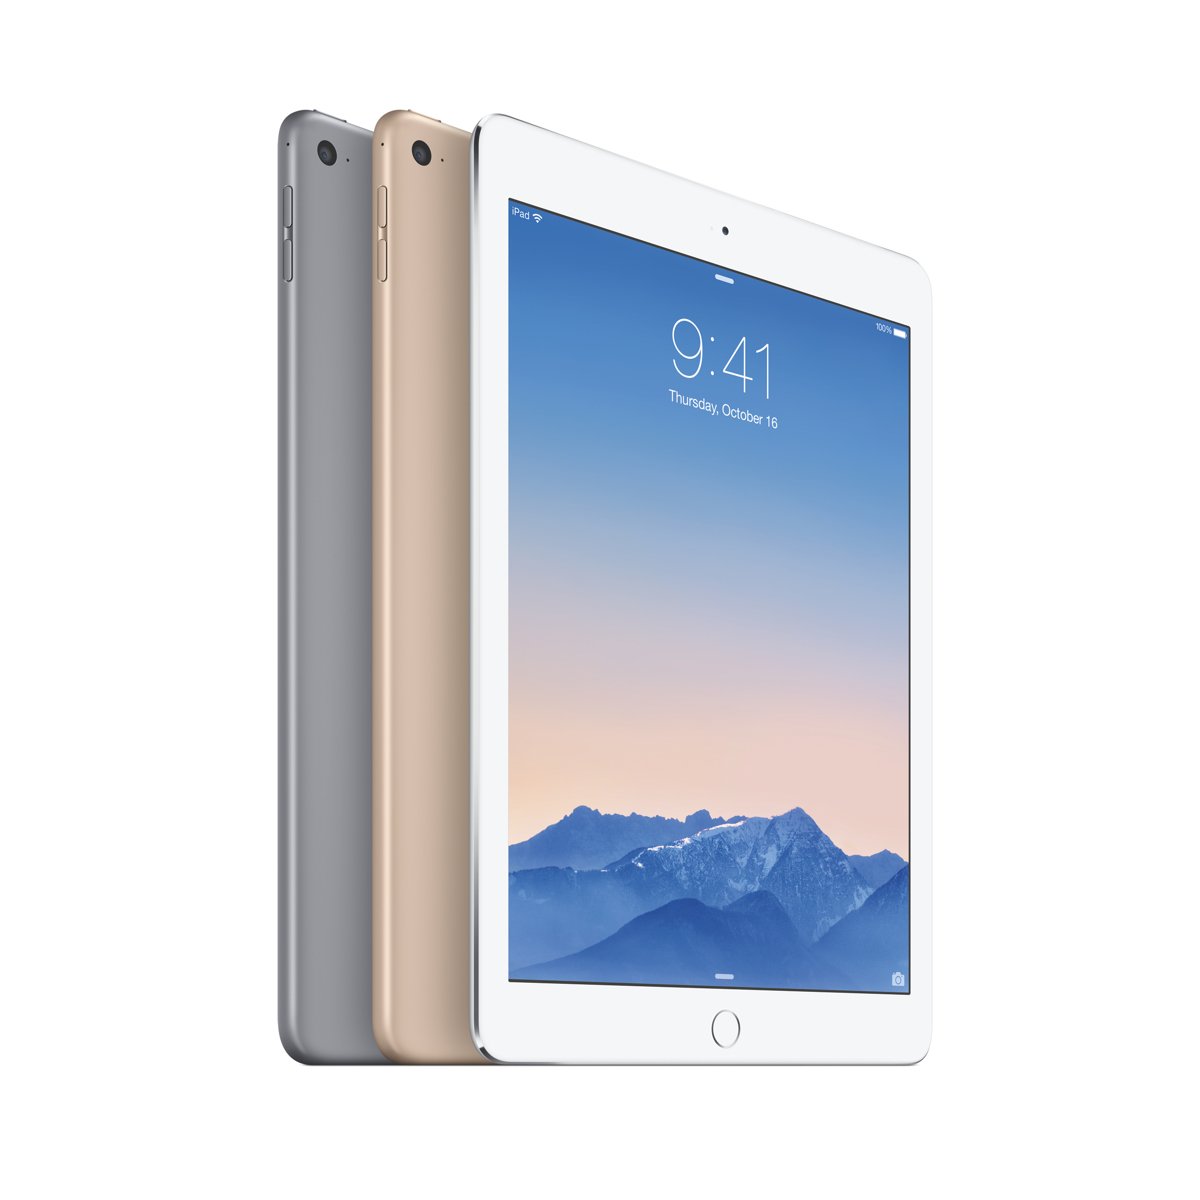 The iPad Air 2 LTE release arrives in stores.